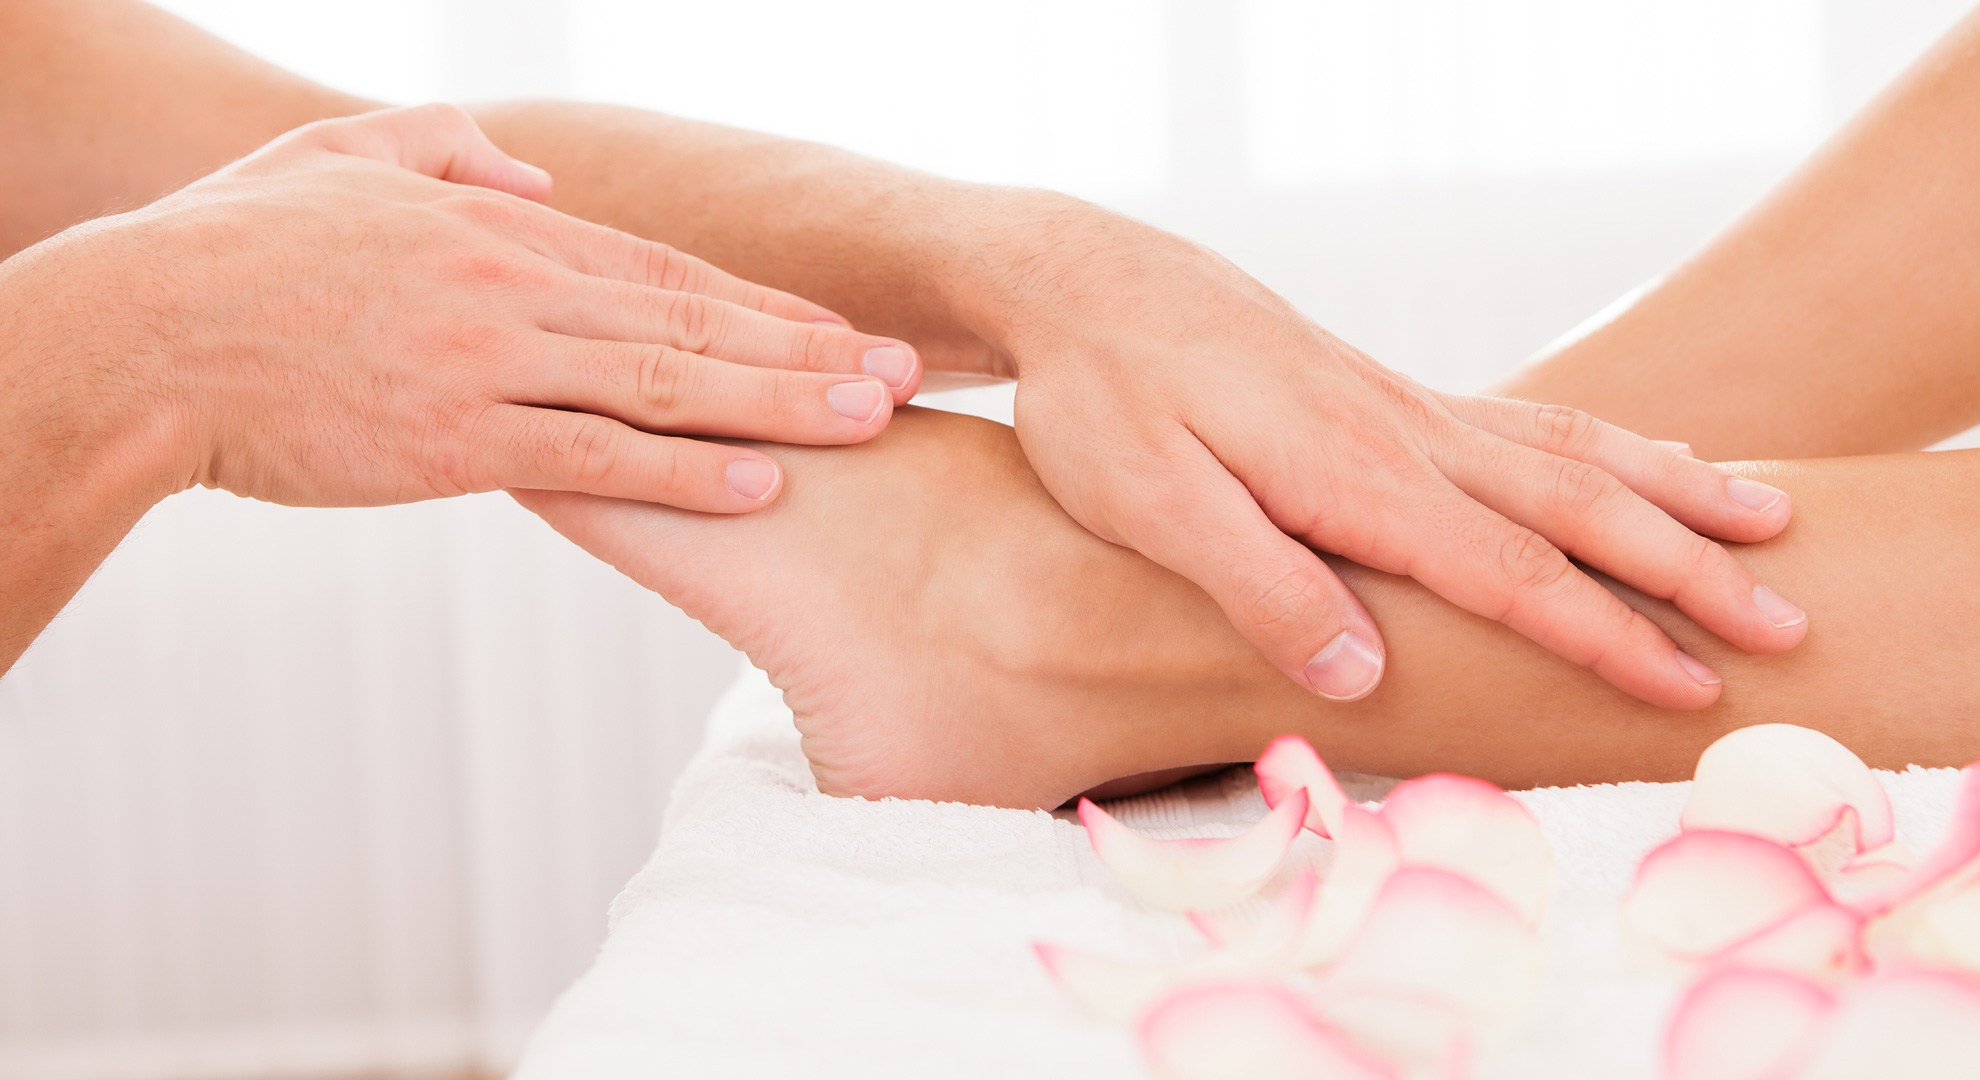 Try This Foot Massage To Give Yourself A Restful Sleep Tonight